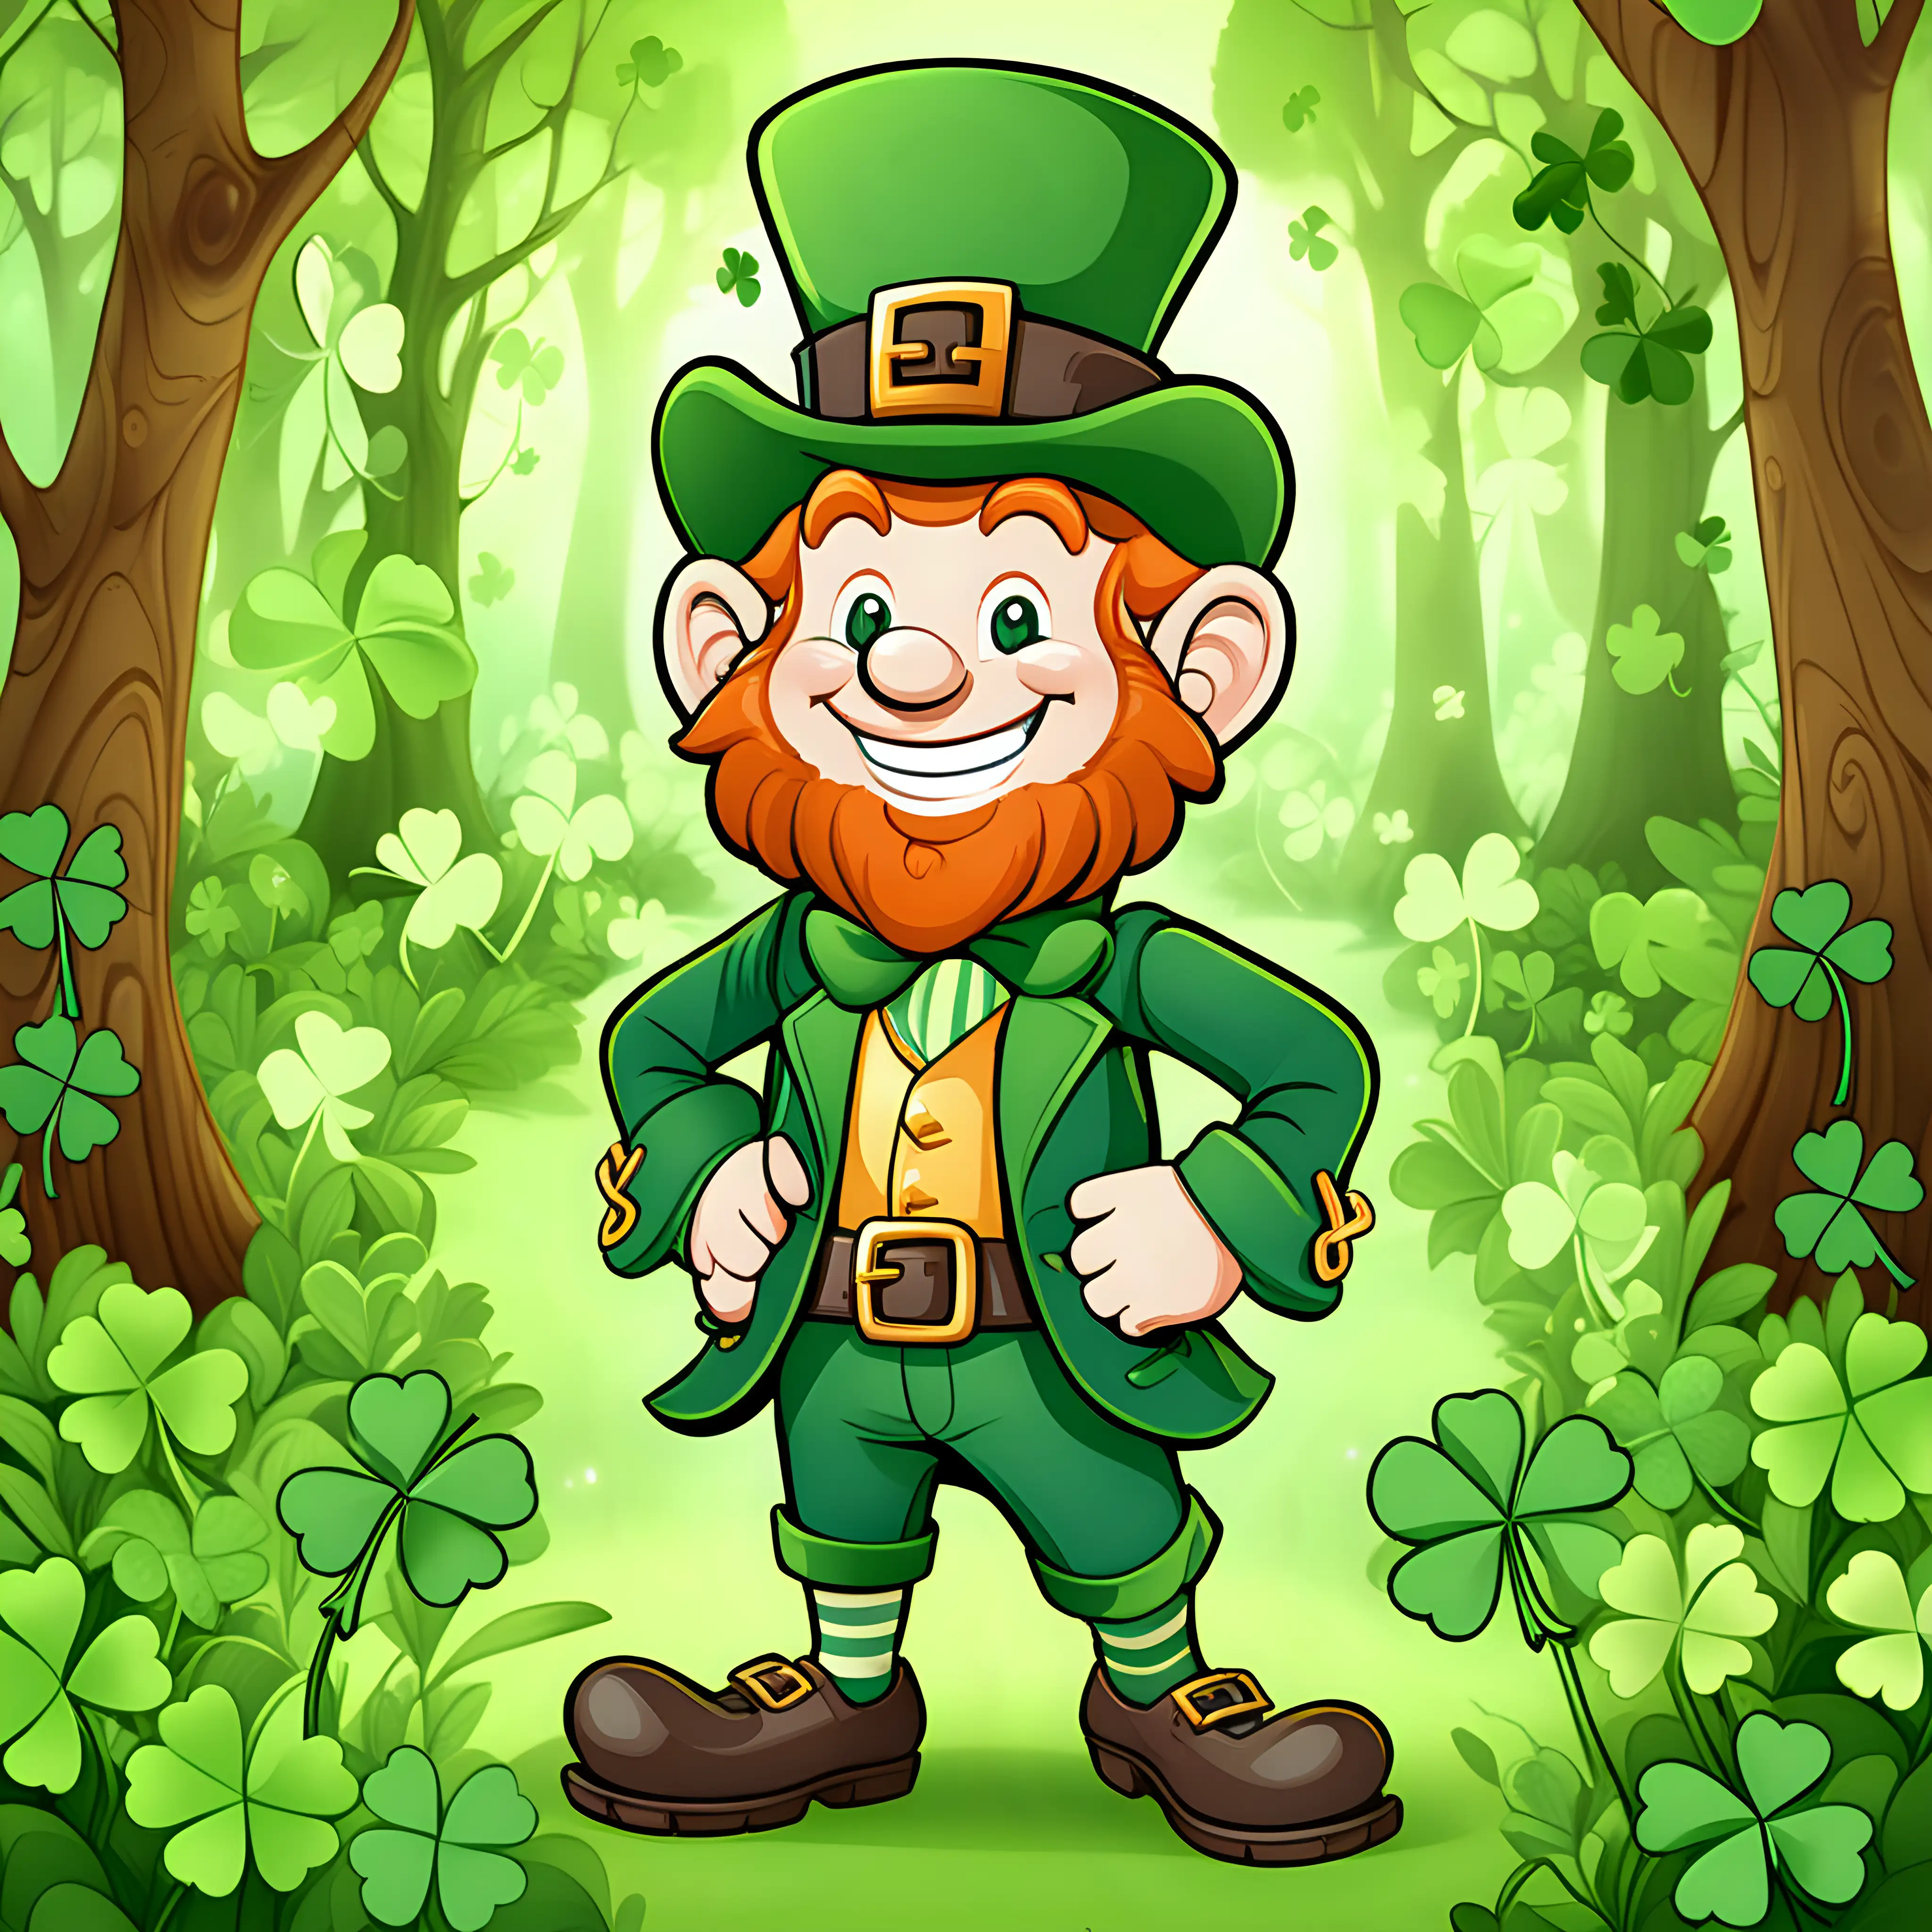 Cheerful Leprechaun Surrounded by FourLeaf Clovers in Enchanting Forest